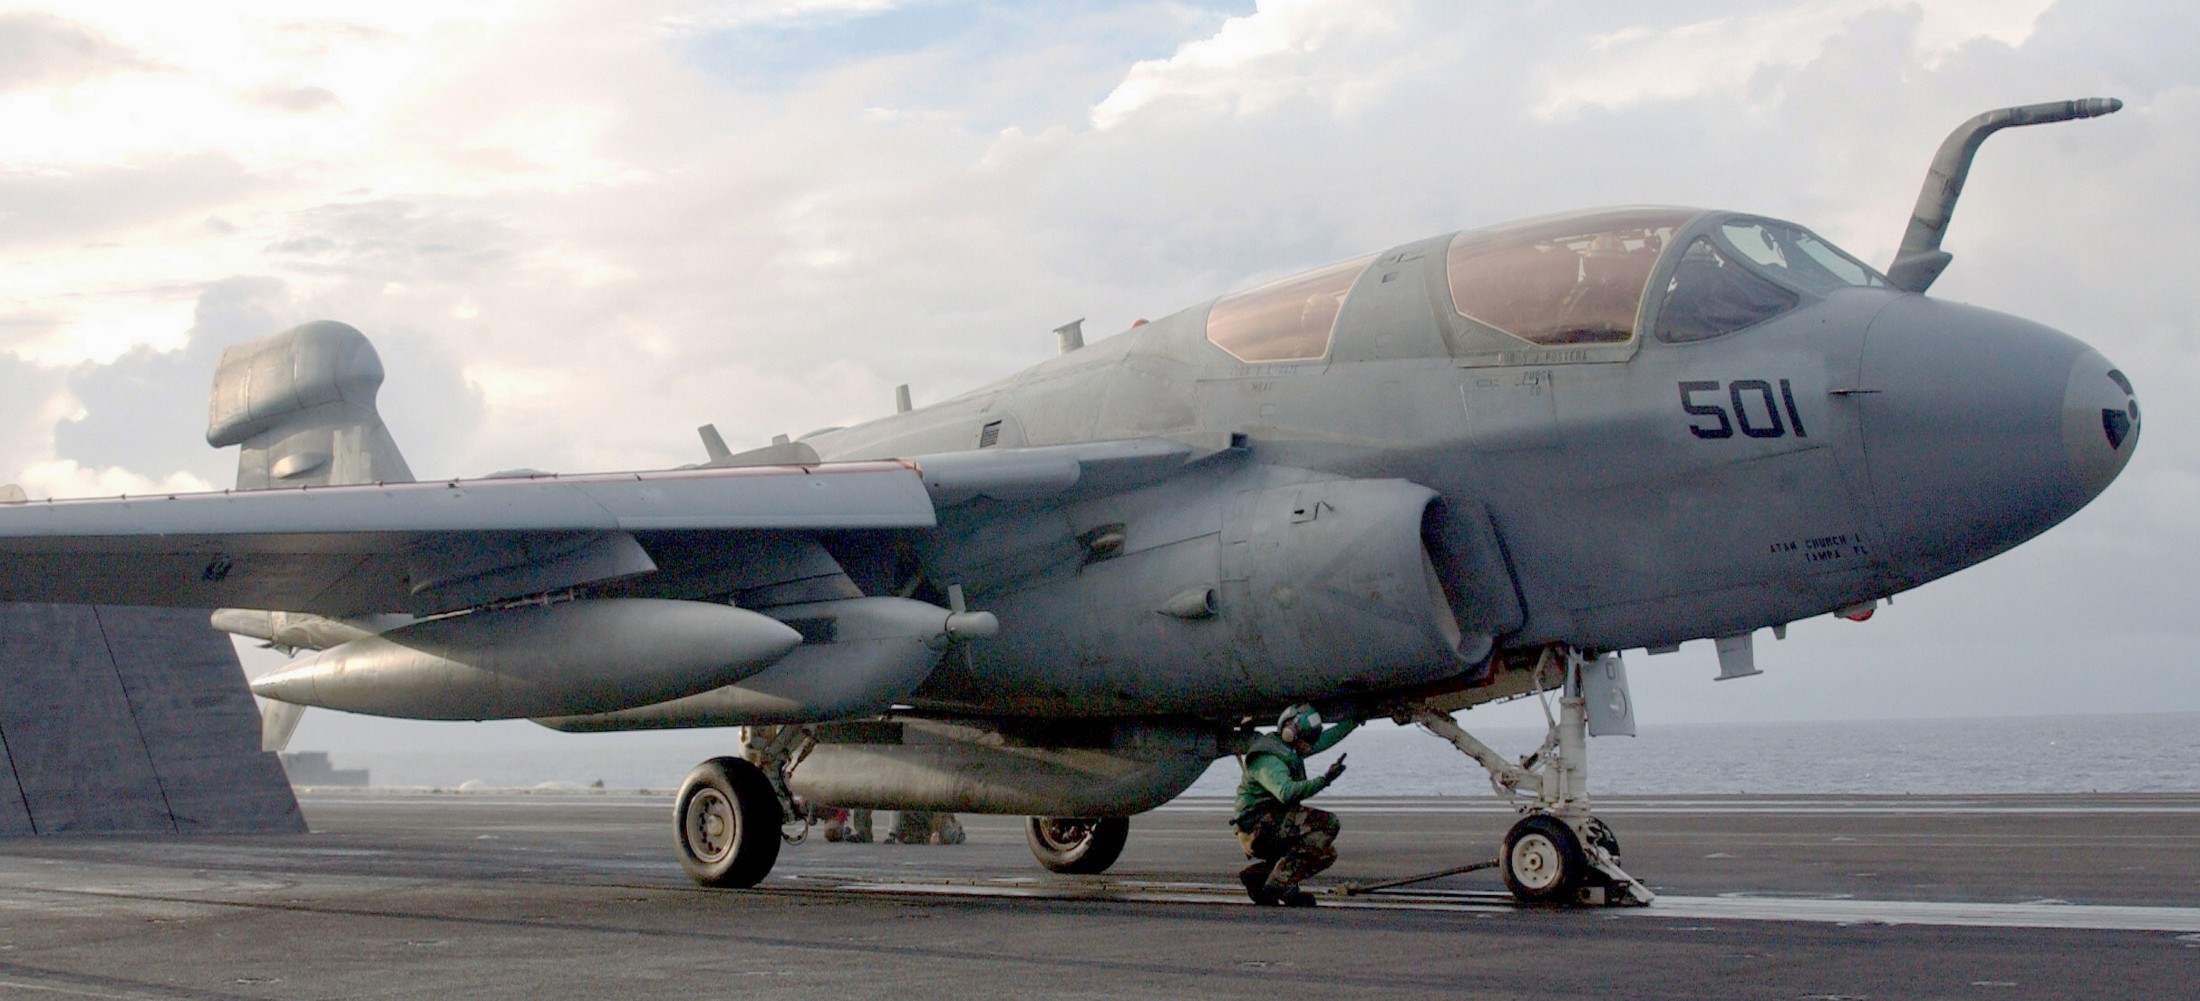 vaq-138 yellowjackets electronic attack squadron us navy ea-6b prowler carrier air wing cvw-9 uss carl vinson cvn-70 08